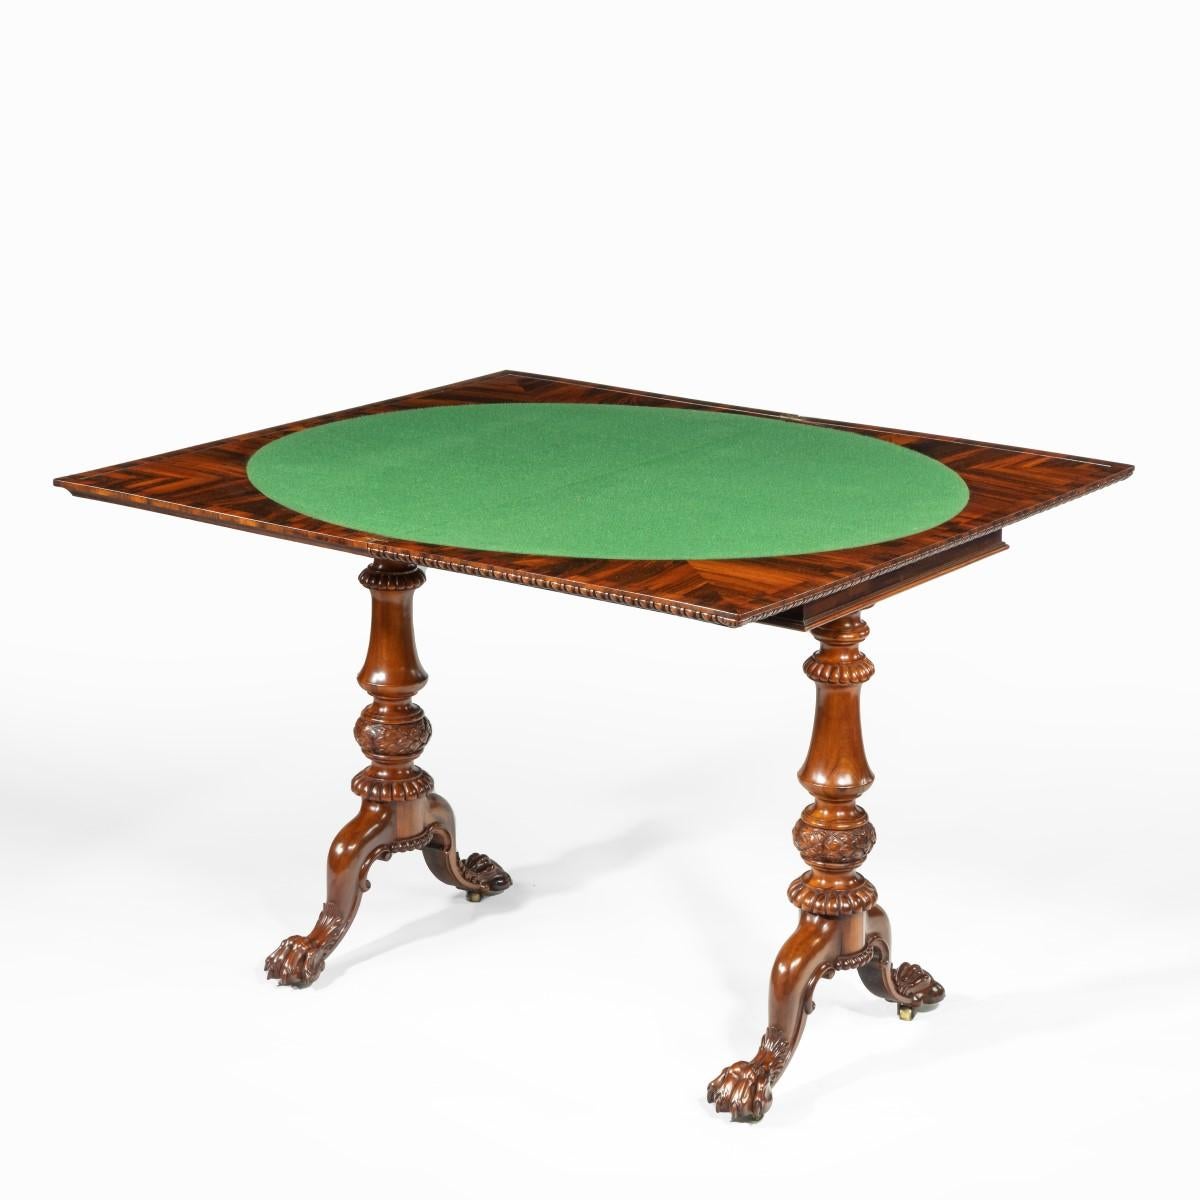 Early Victorian Goncalo Alves Card Table Attributed to Gillows For Sale 2